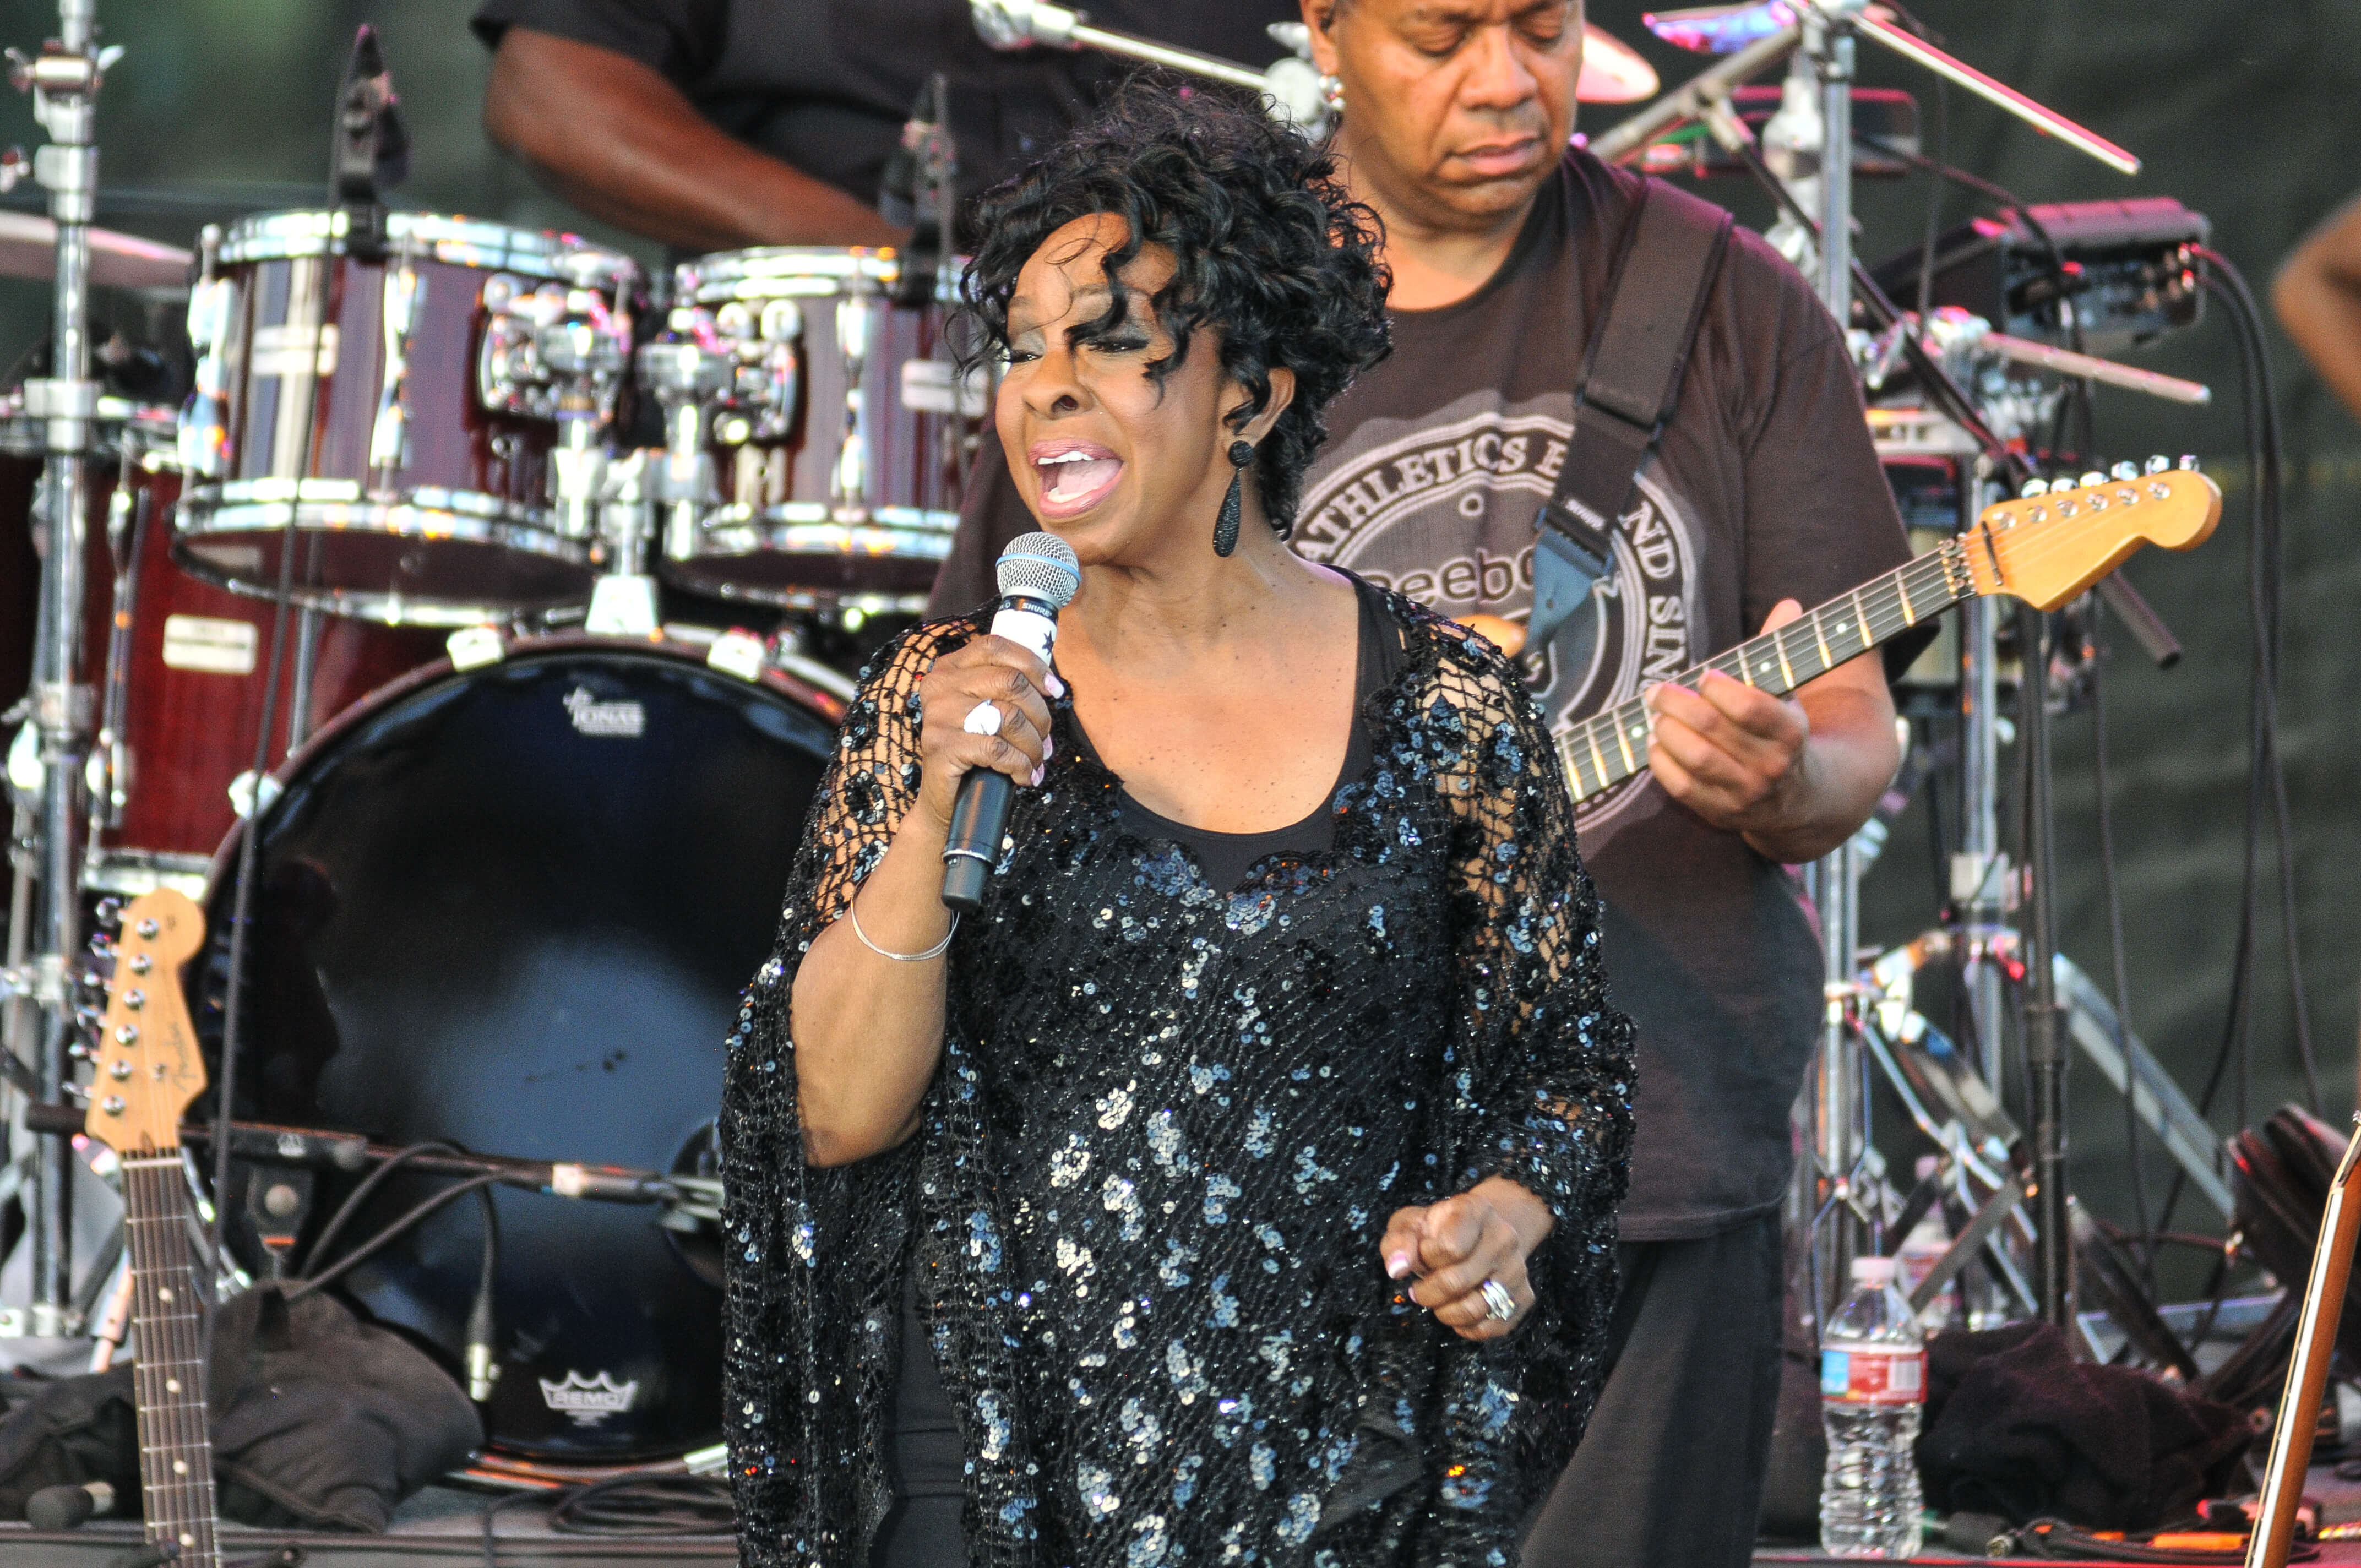 Gladys Knight in concert